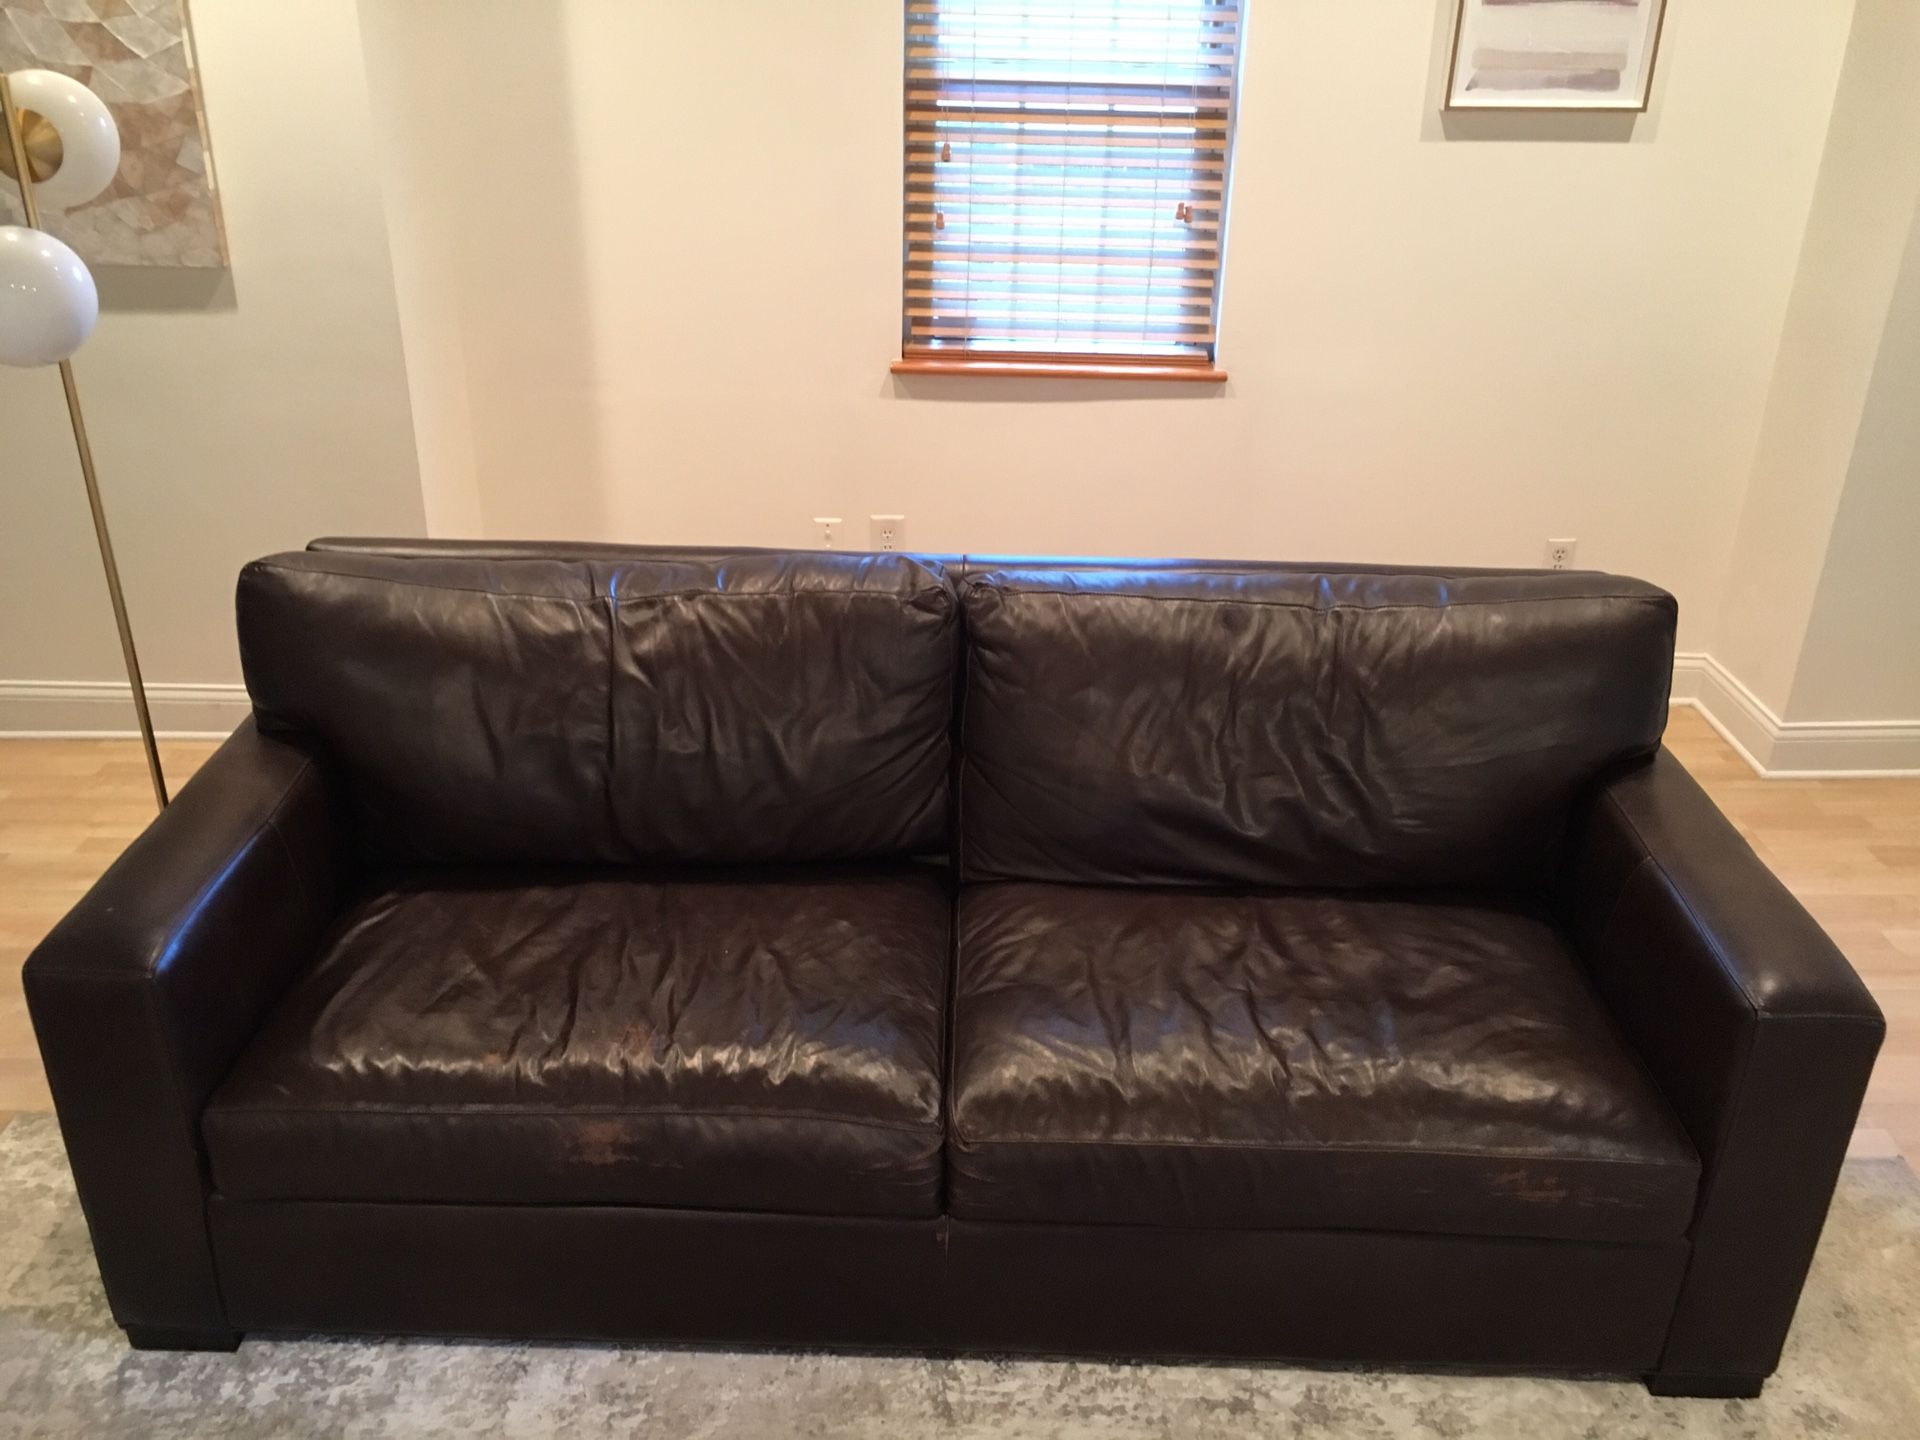 Crate and Barrel leather couch (sleeper sofa)